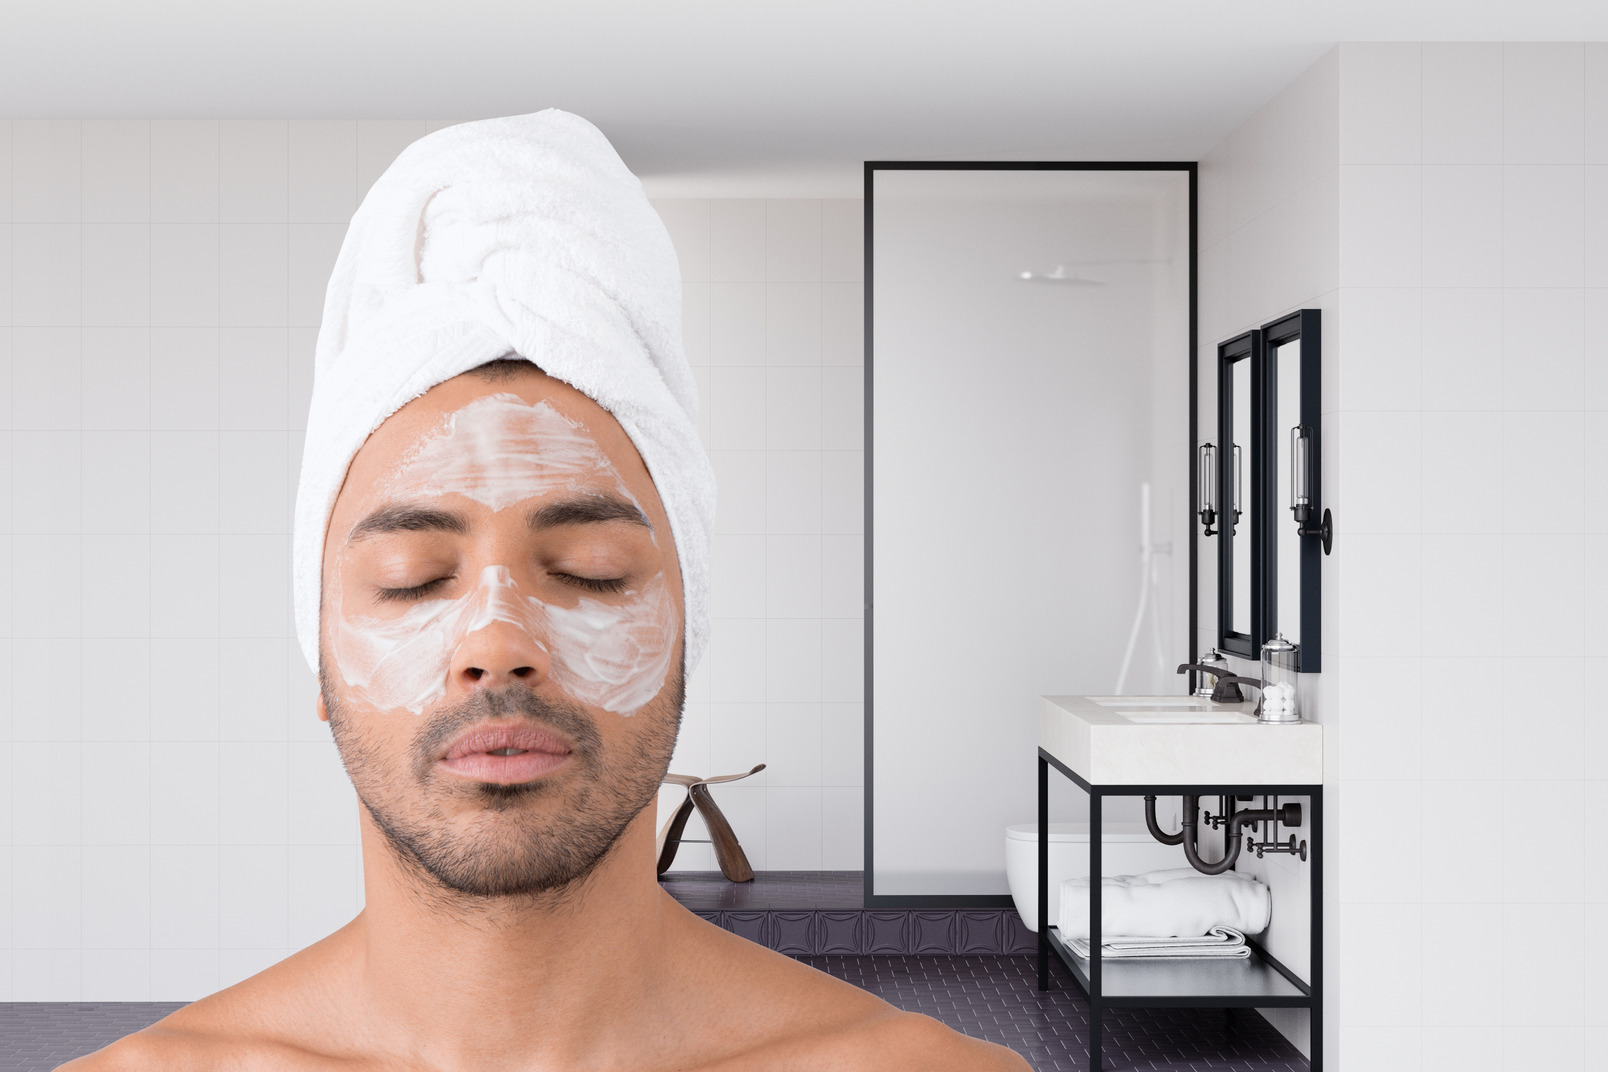 Silence, cleanliness, calmness and moisturizing mask - the perfect ending of the working day